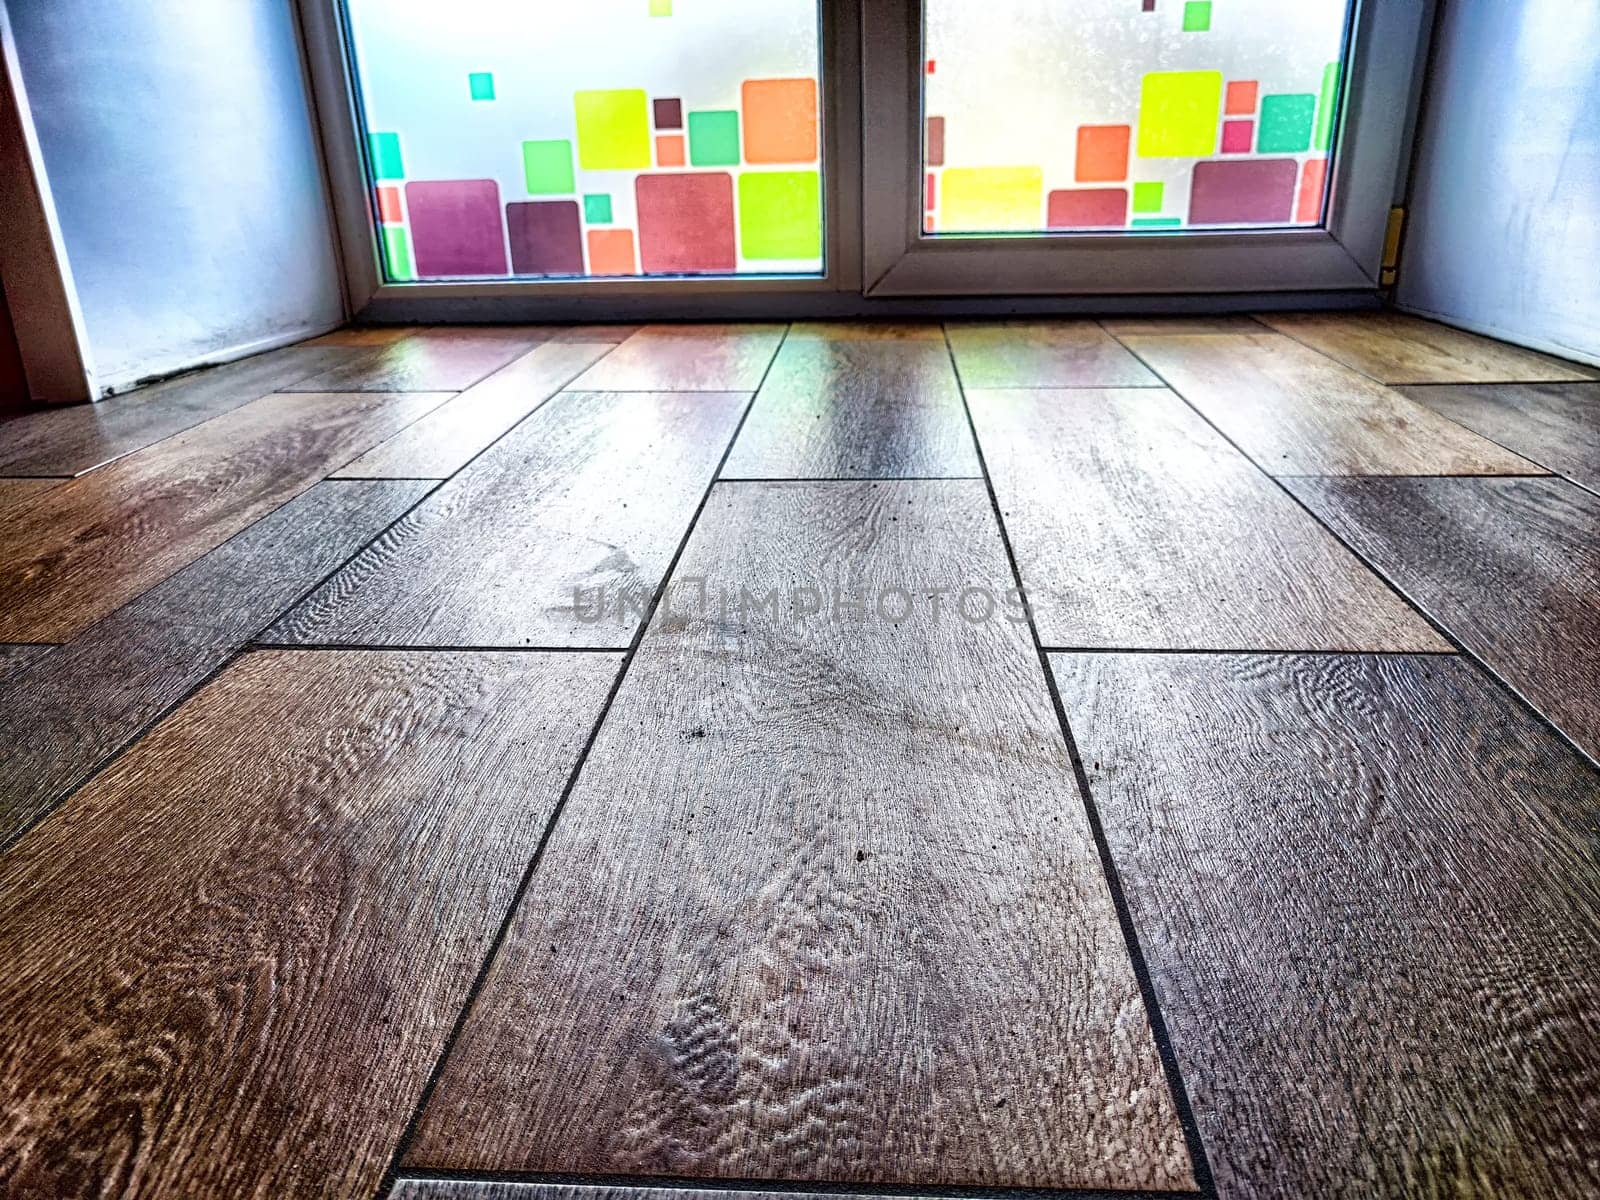 Window and floor. Background, texture. Frosted Glass Door With Colorful Square Details in a Wooden Interior by keleny